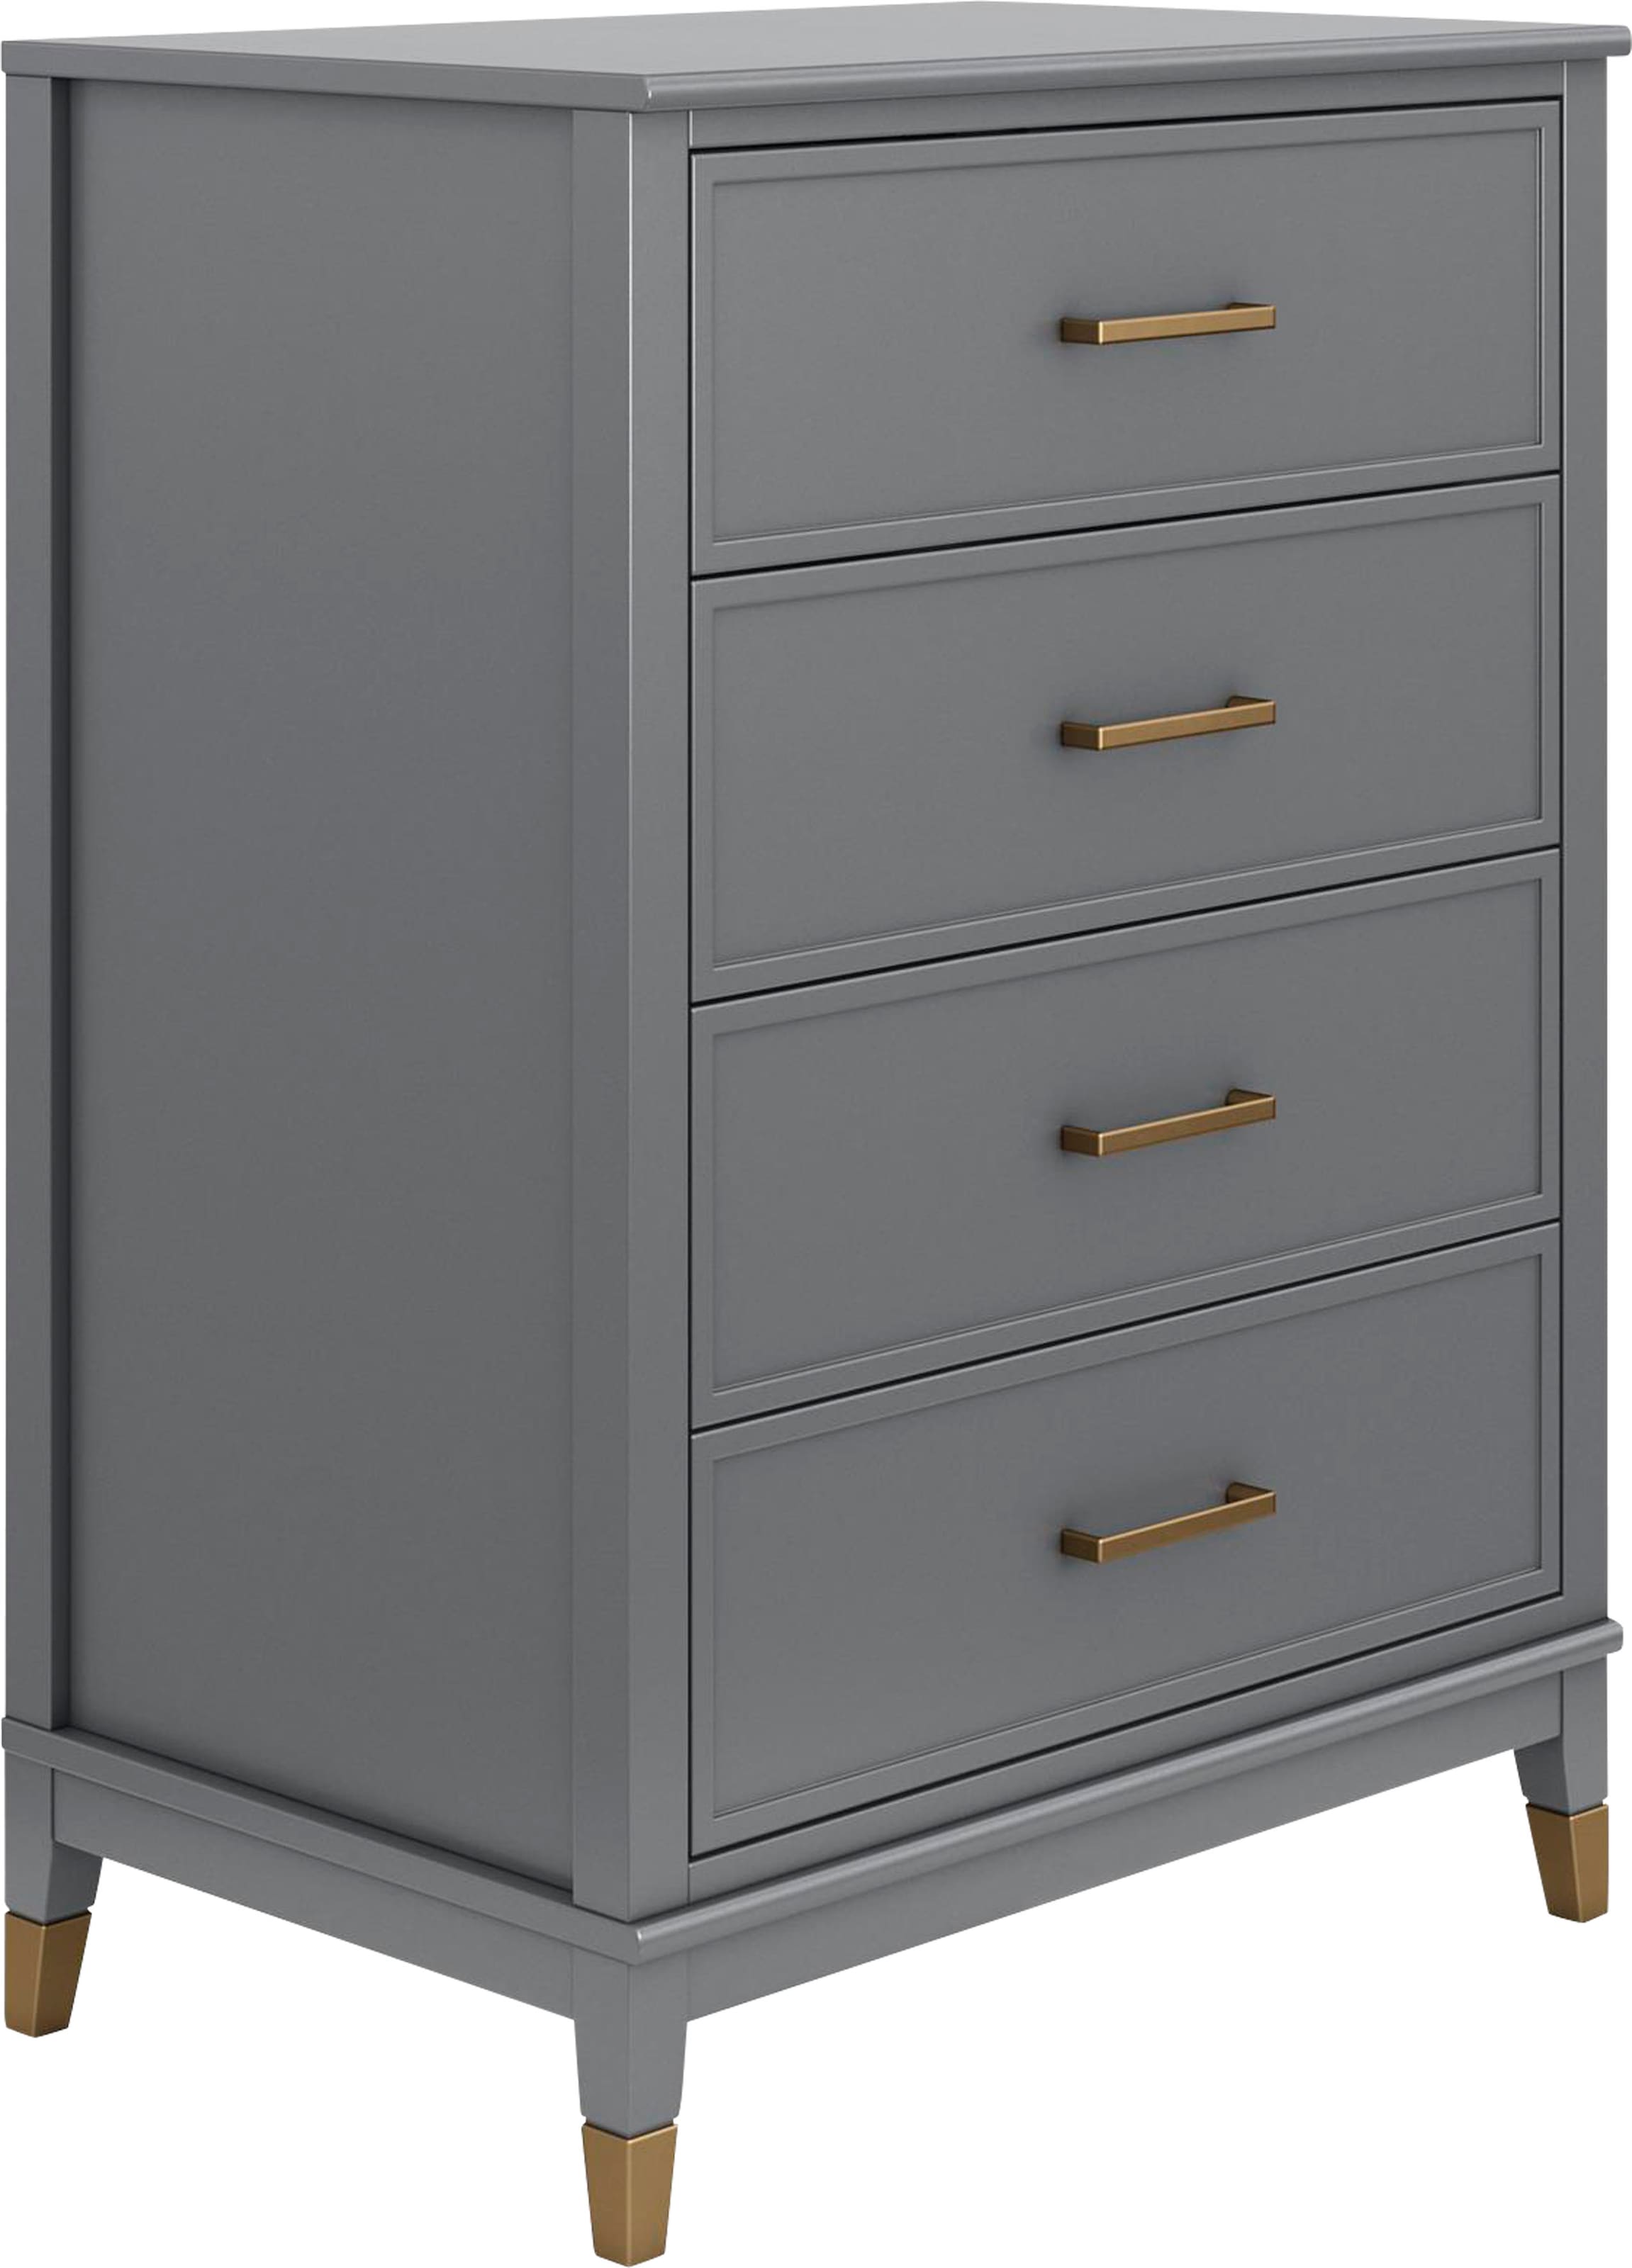 Cosmoliving By Cosmopolitan Westerleigh 4 Drawer Chest - Graphite Grey|